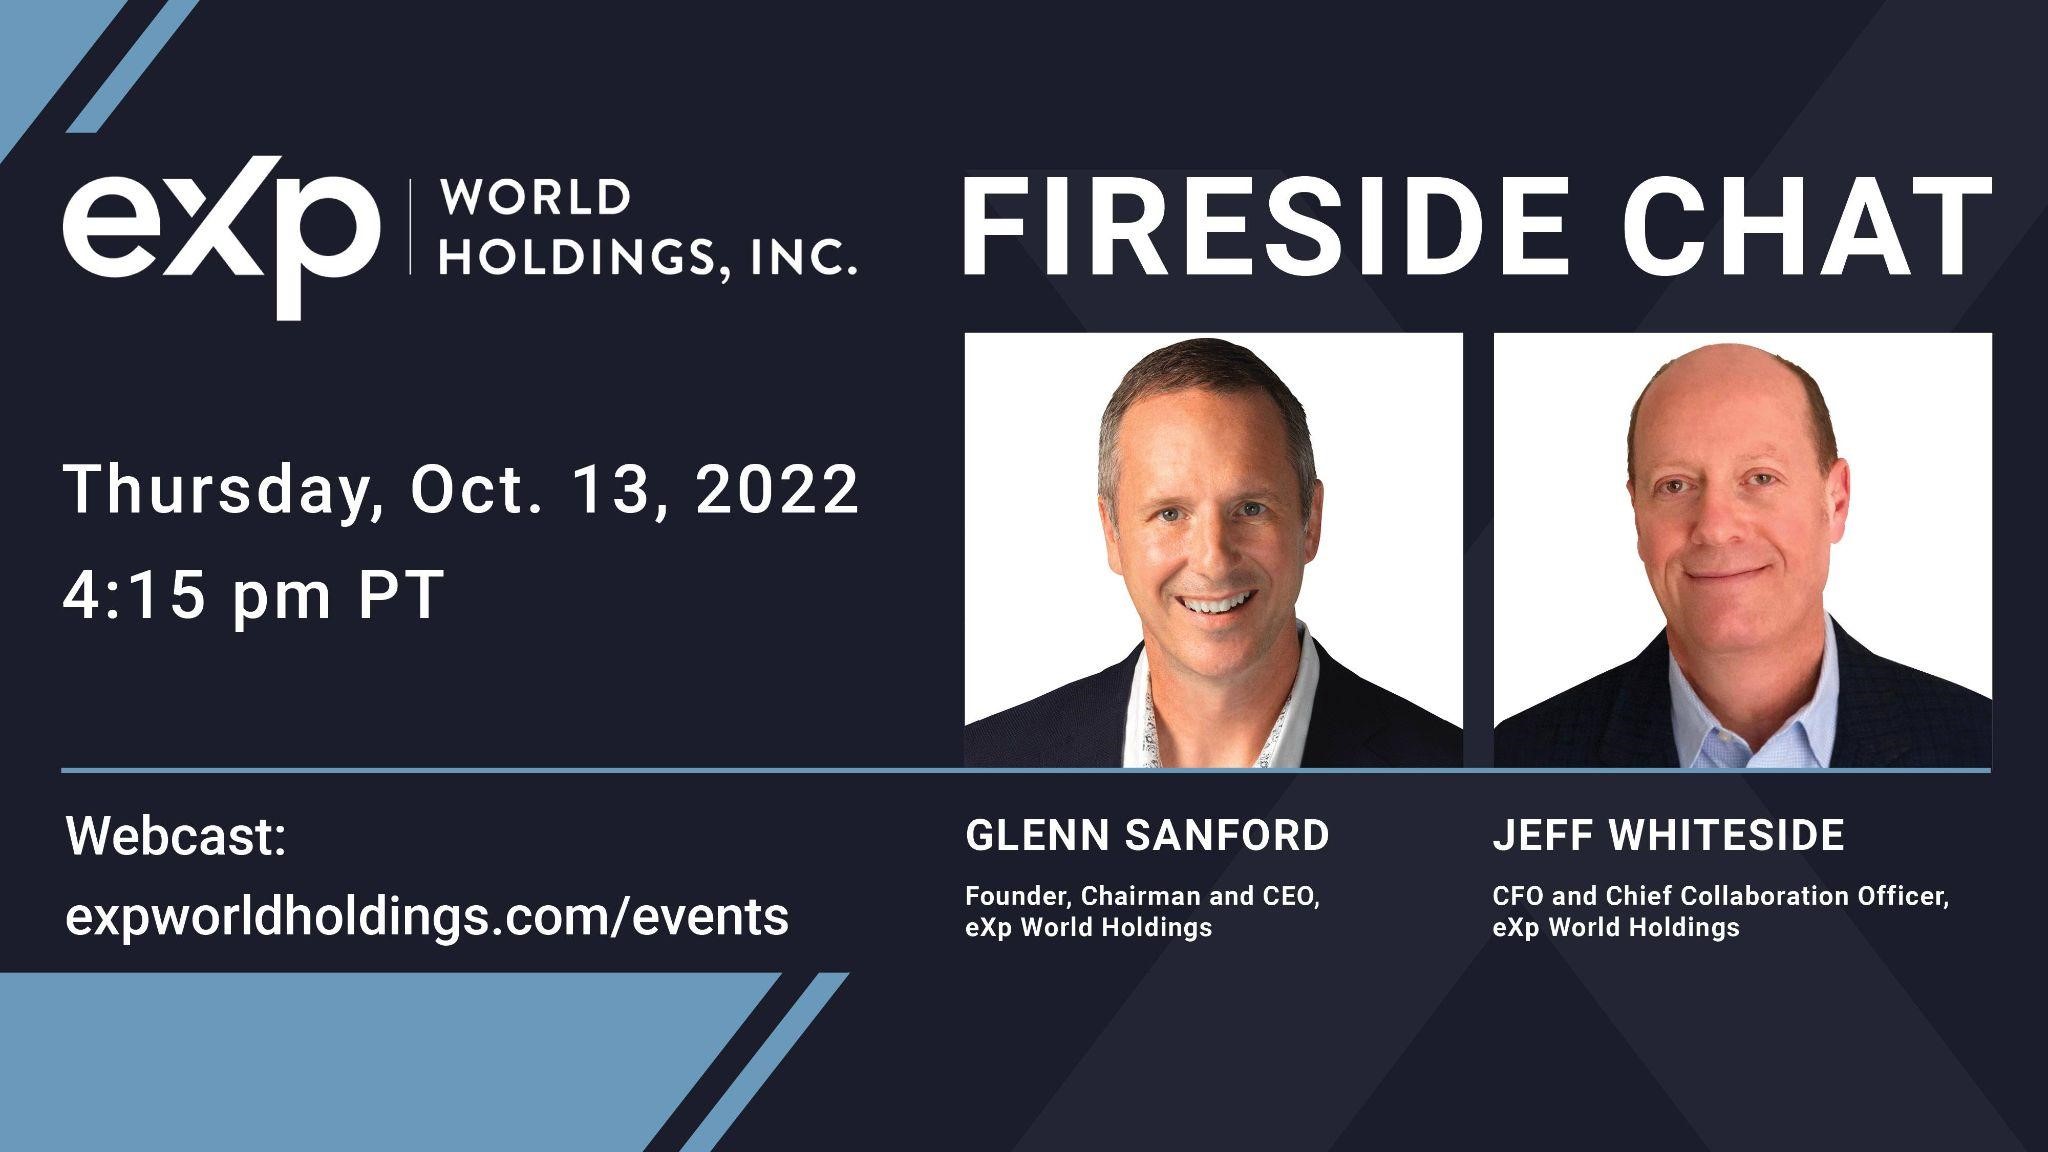 eXp World Holdings to Host Fireside Chat at EXPCON